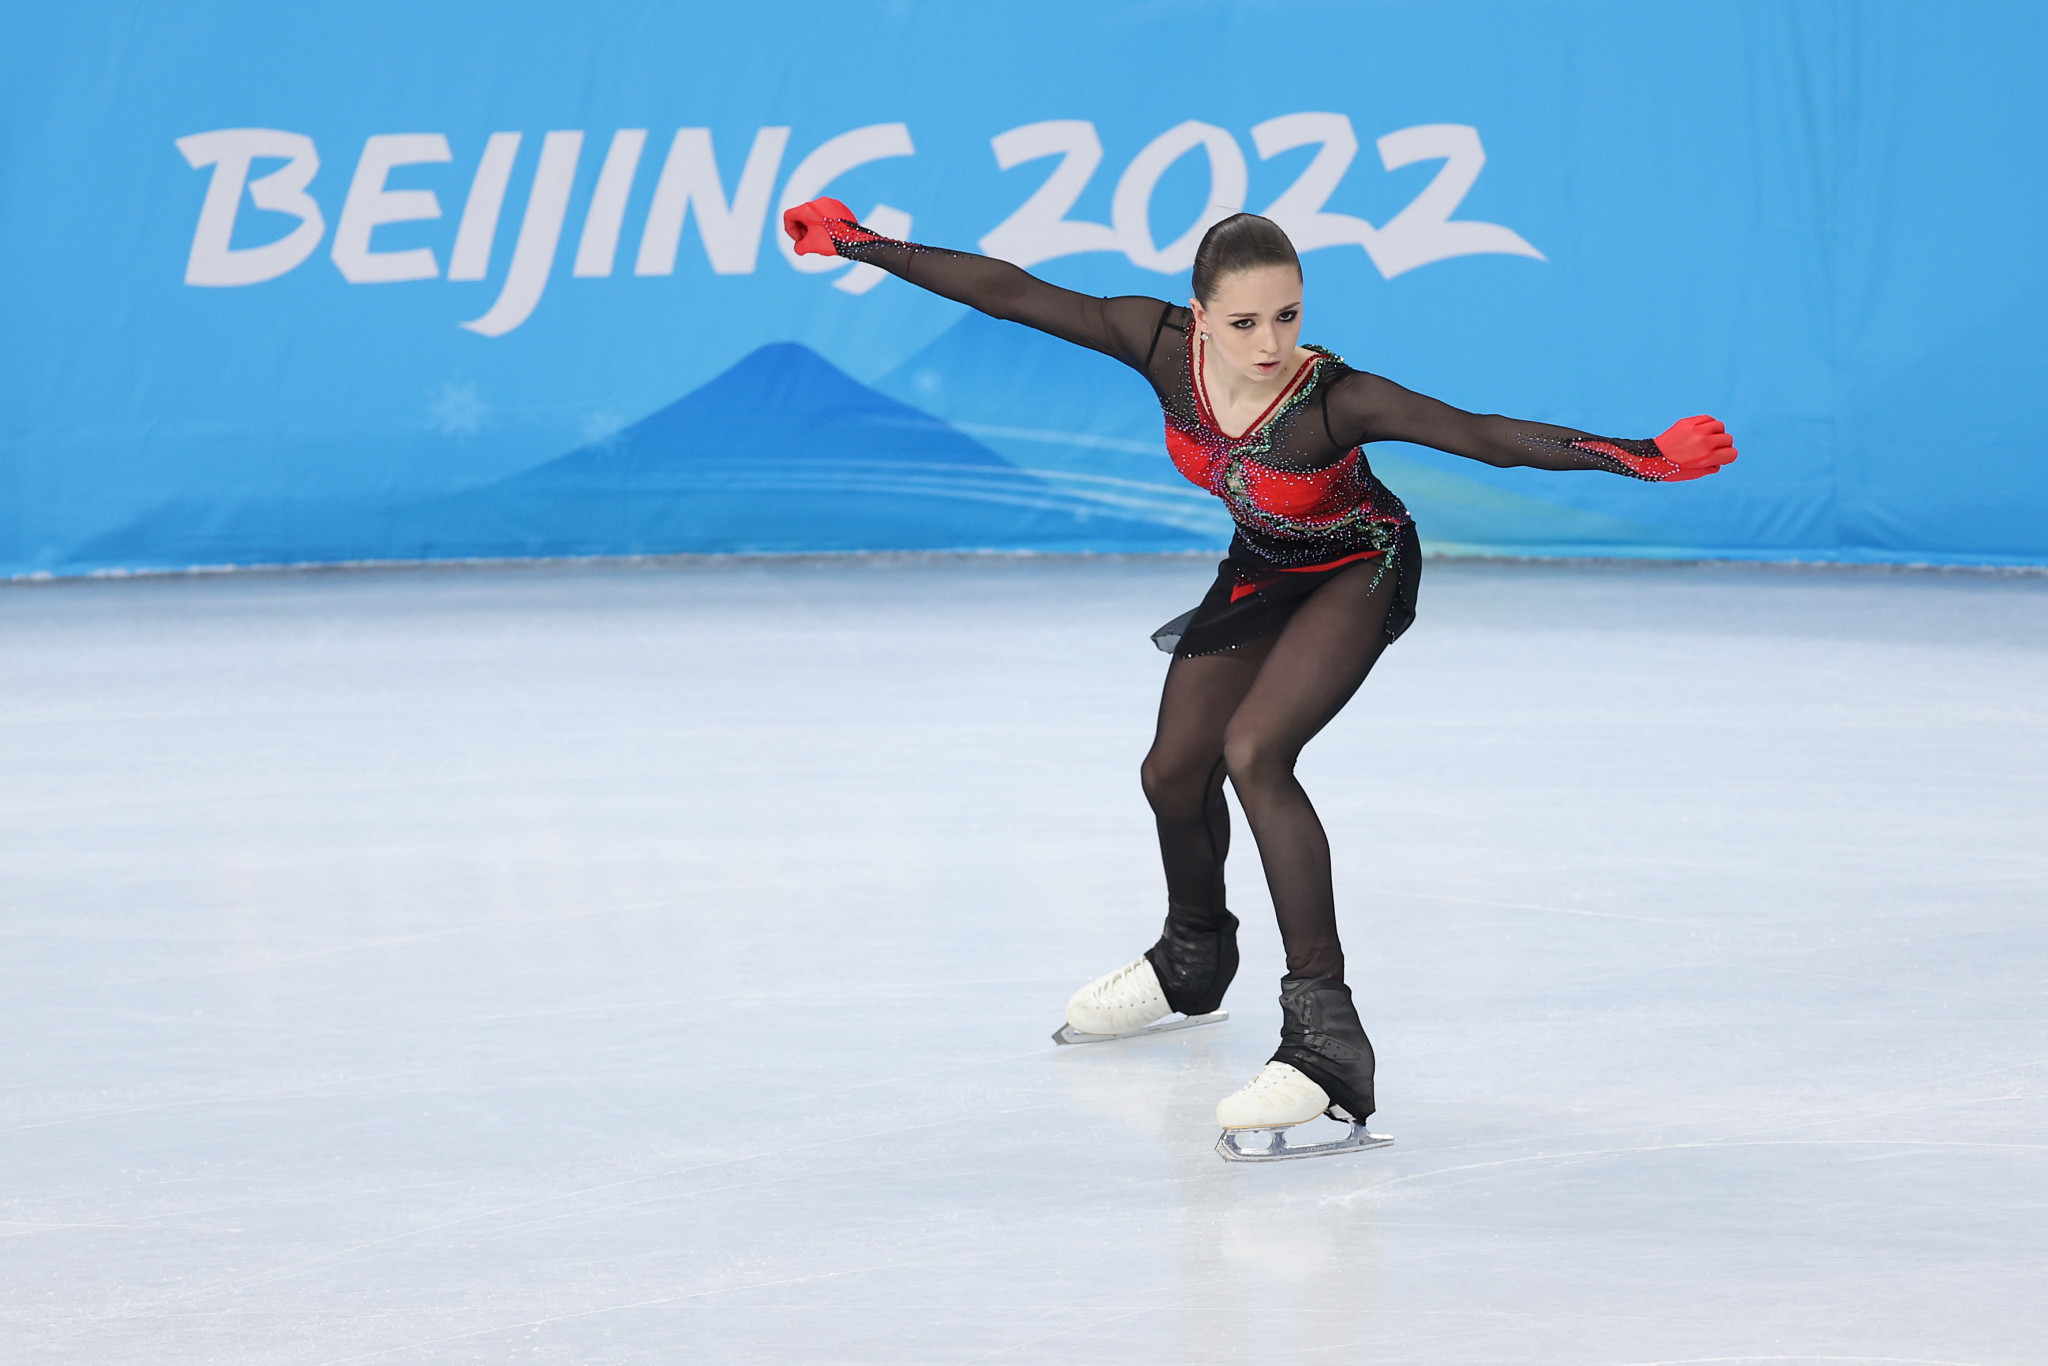 A legal problem involving an anti-doping test taken by 15-year-old Kamila Valieva is the reason the medal ceremony for the  team figure skating competition at Beijing 2022 has been delayed ©Getty Images